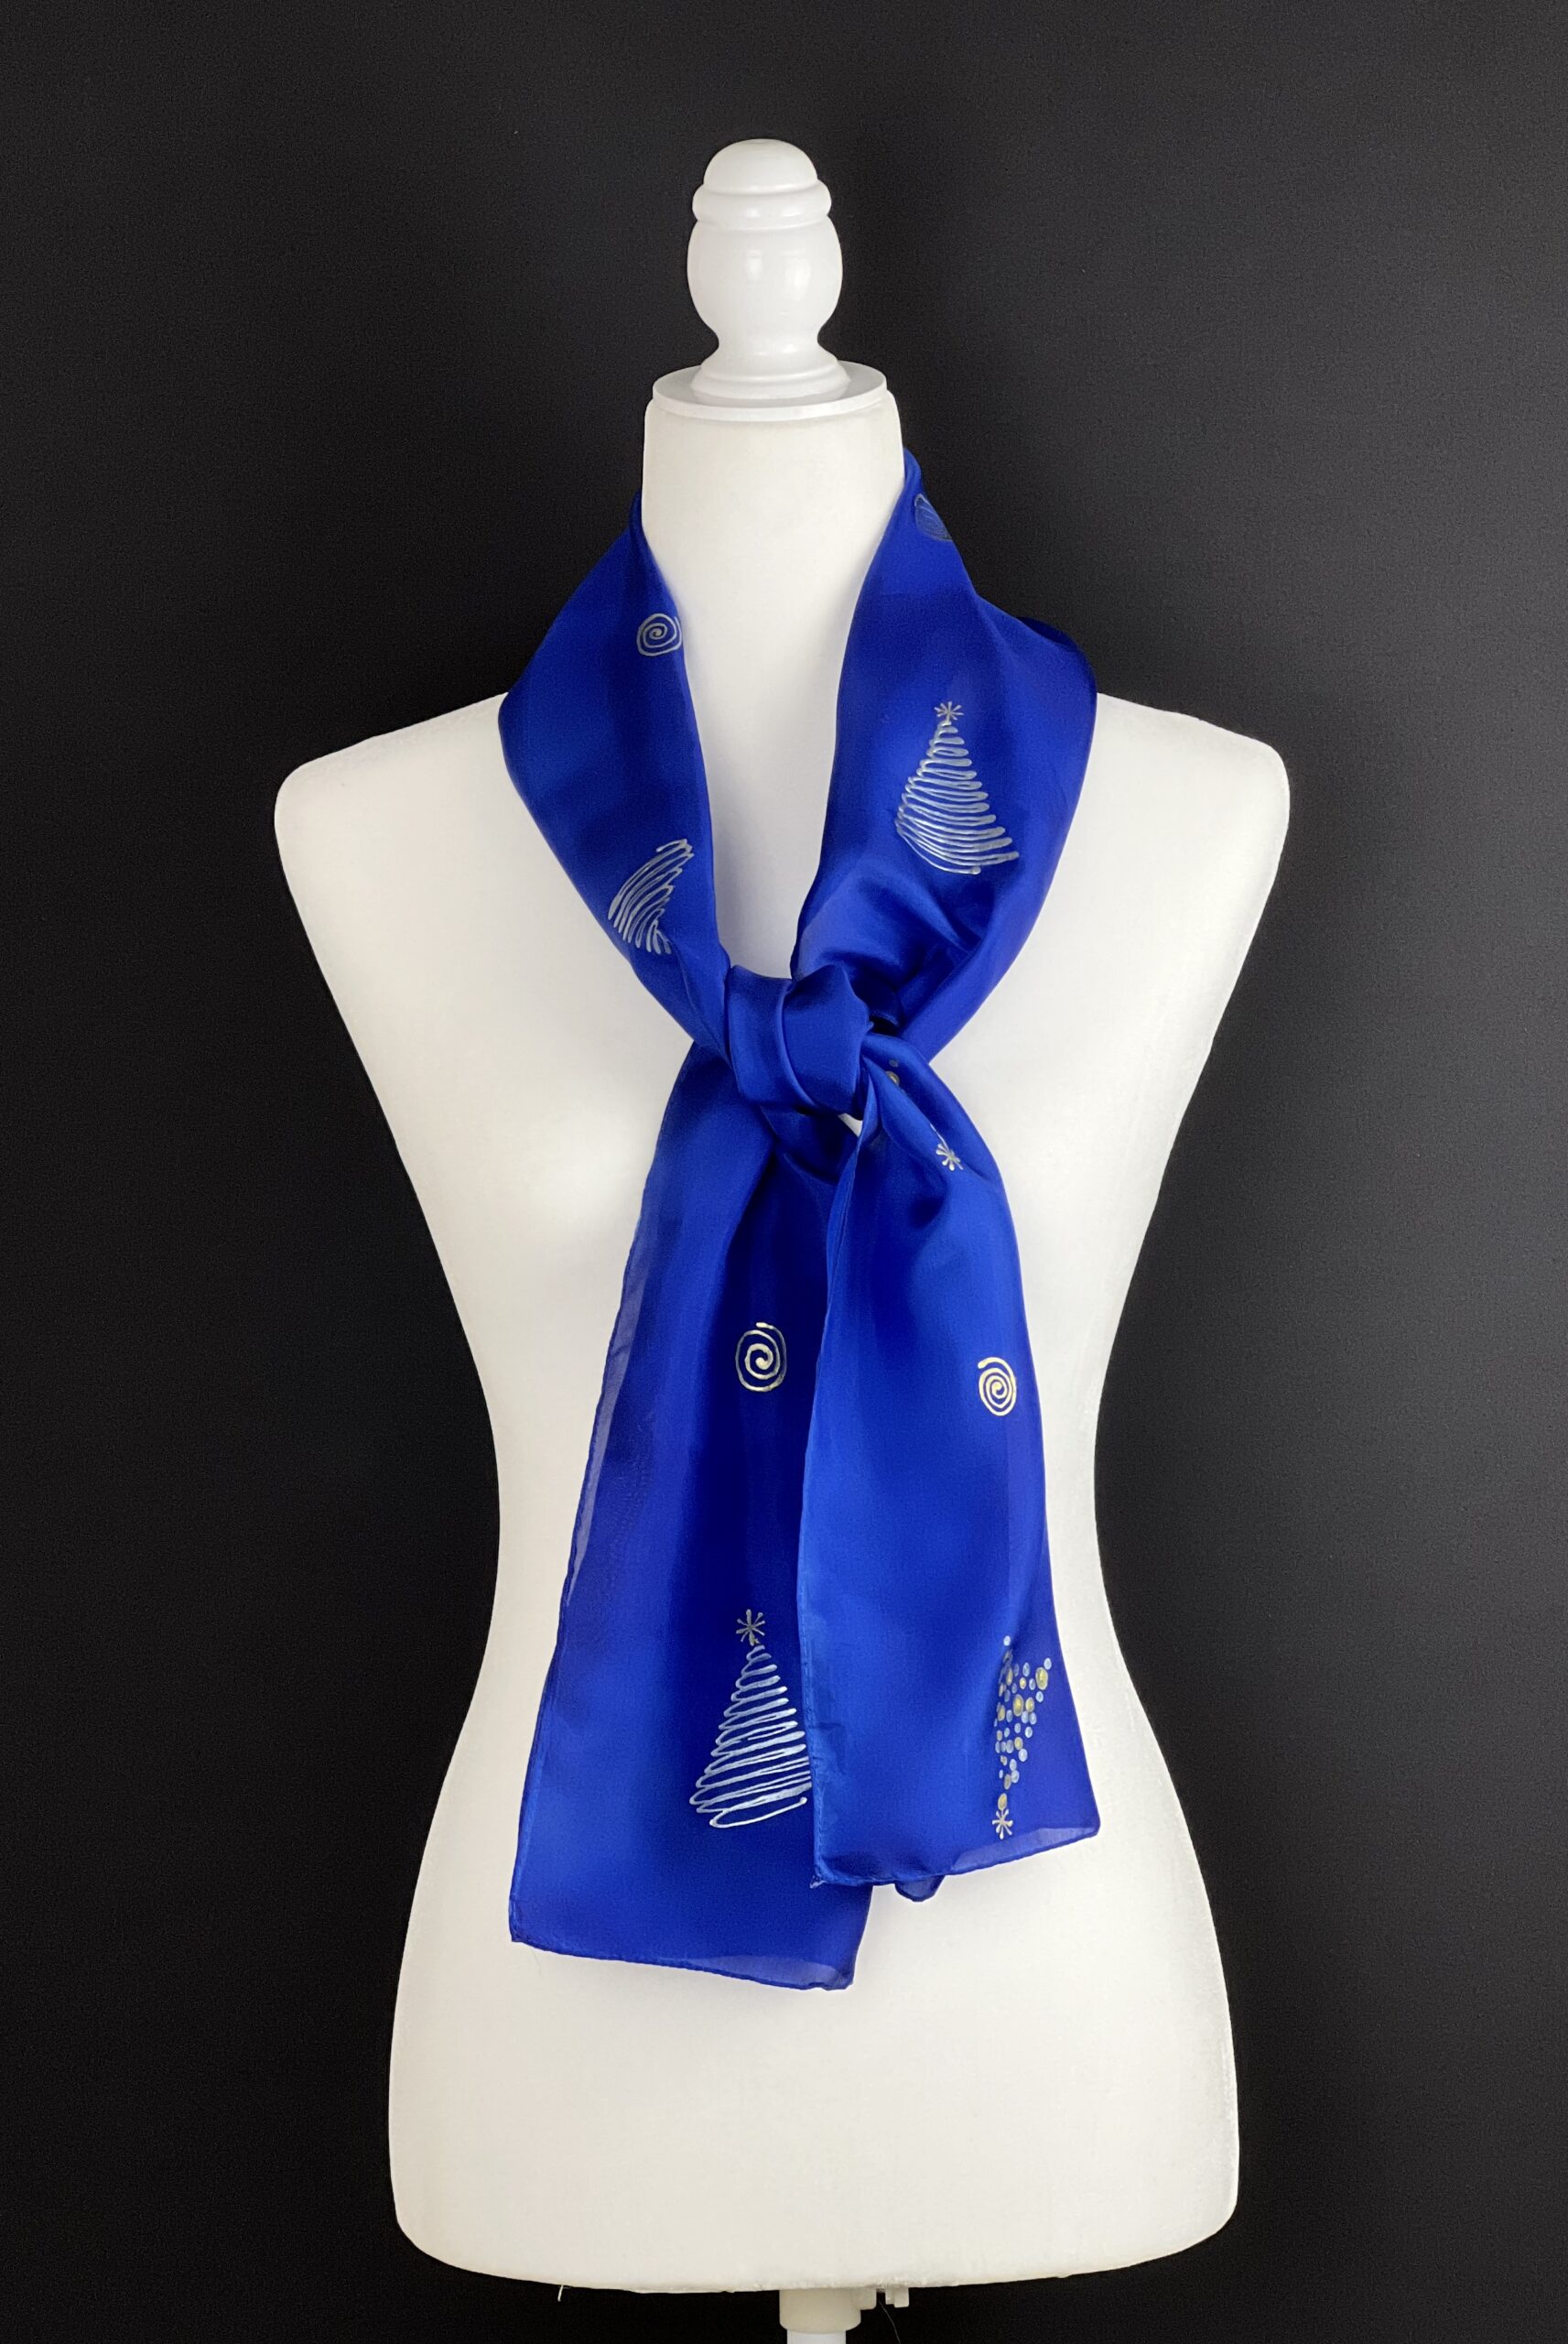 Holiday silk scarf, hand-painted chritmas motifs on royal blue. Luxe